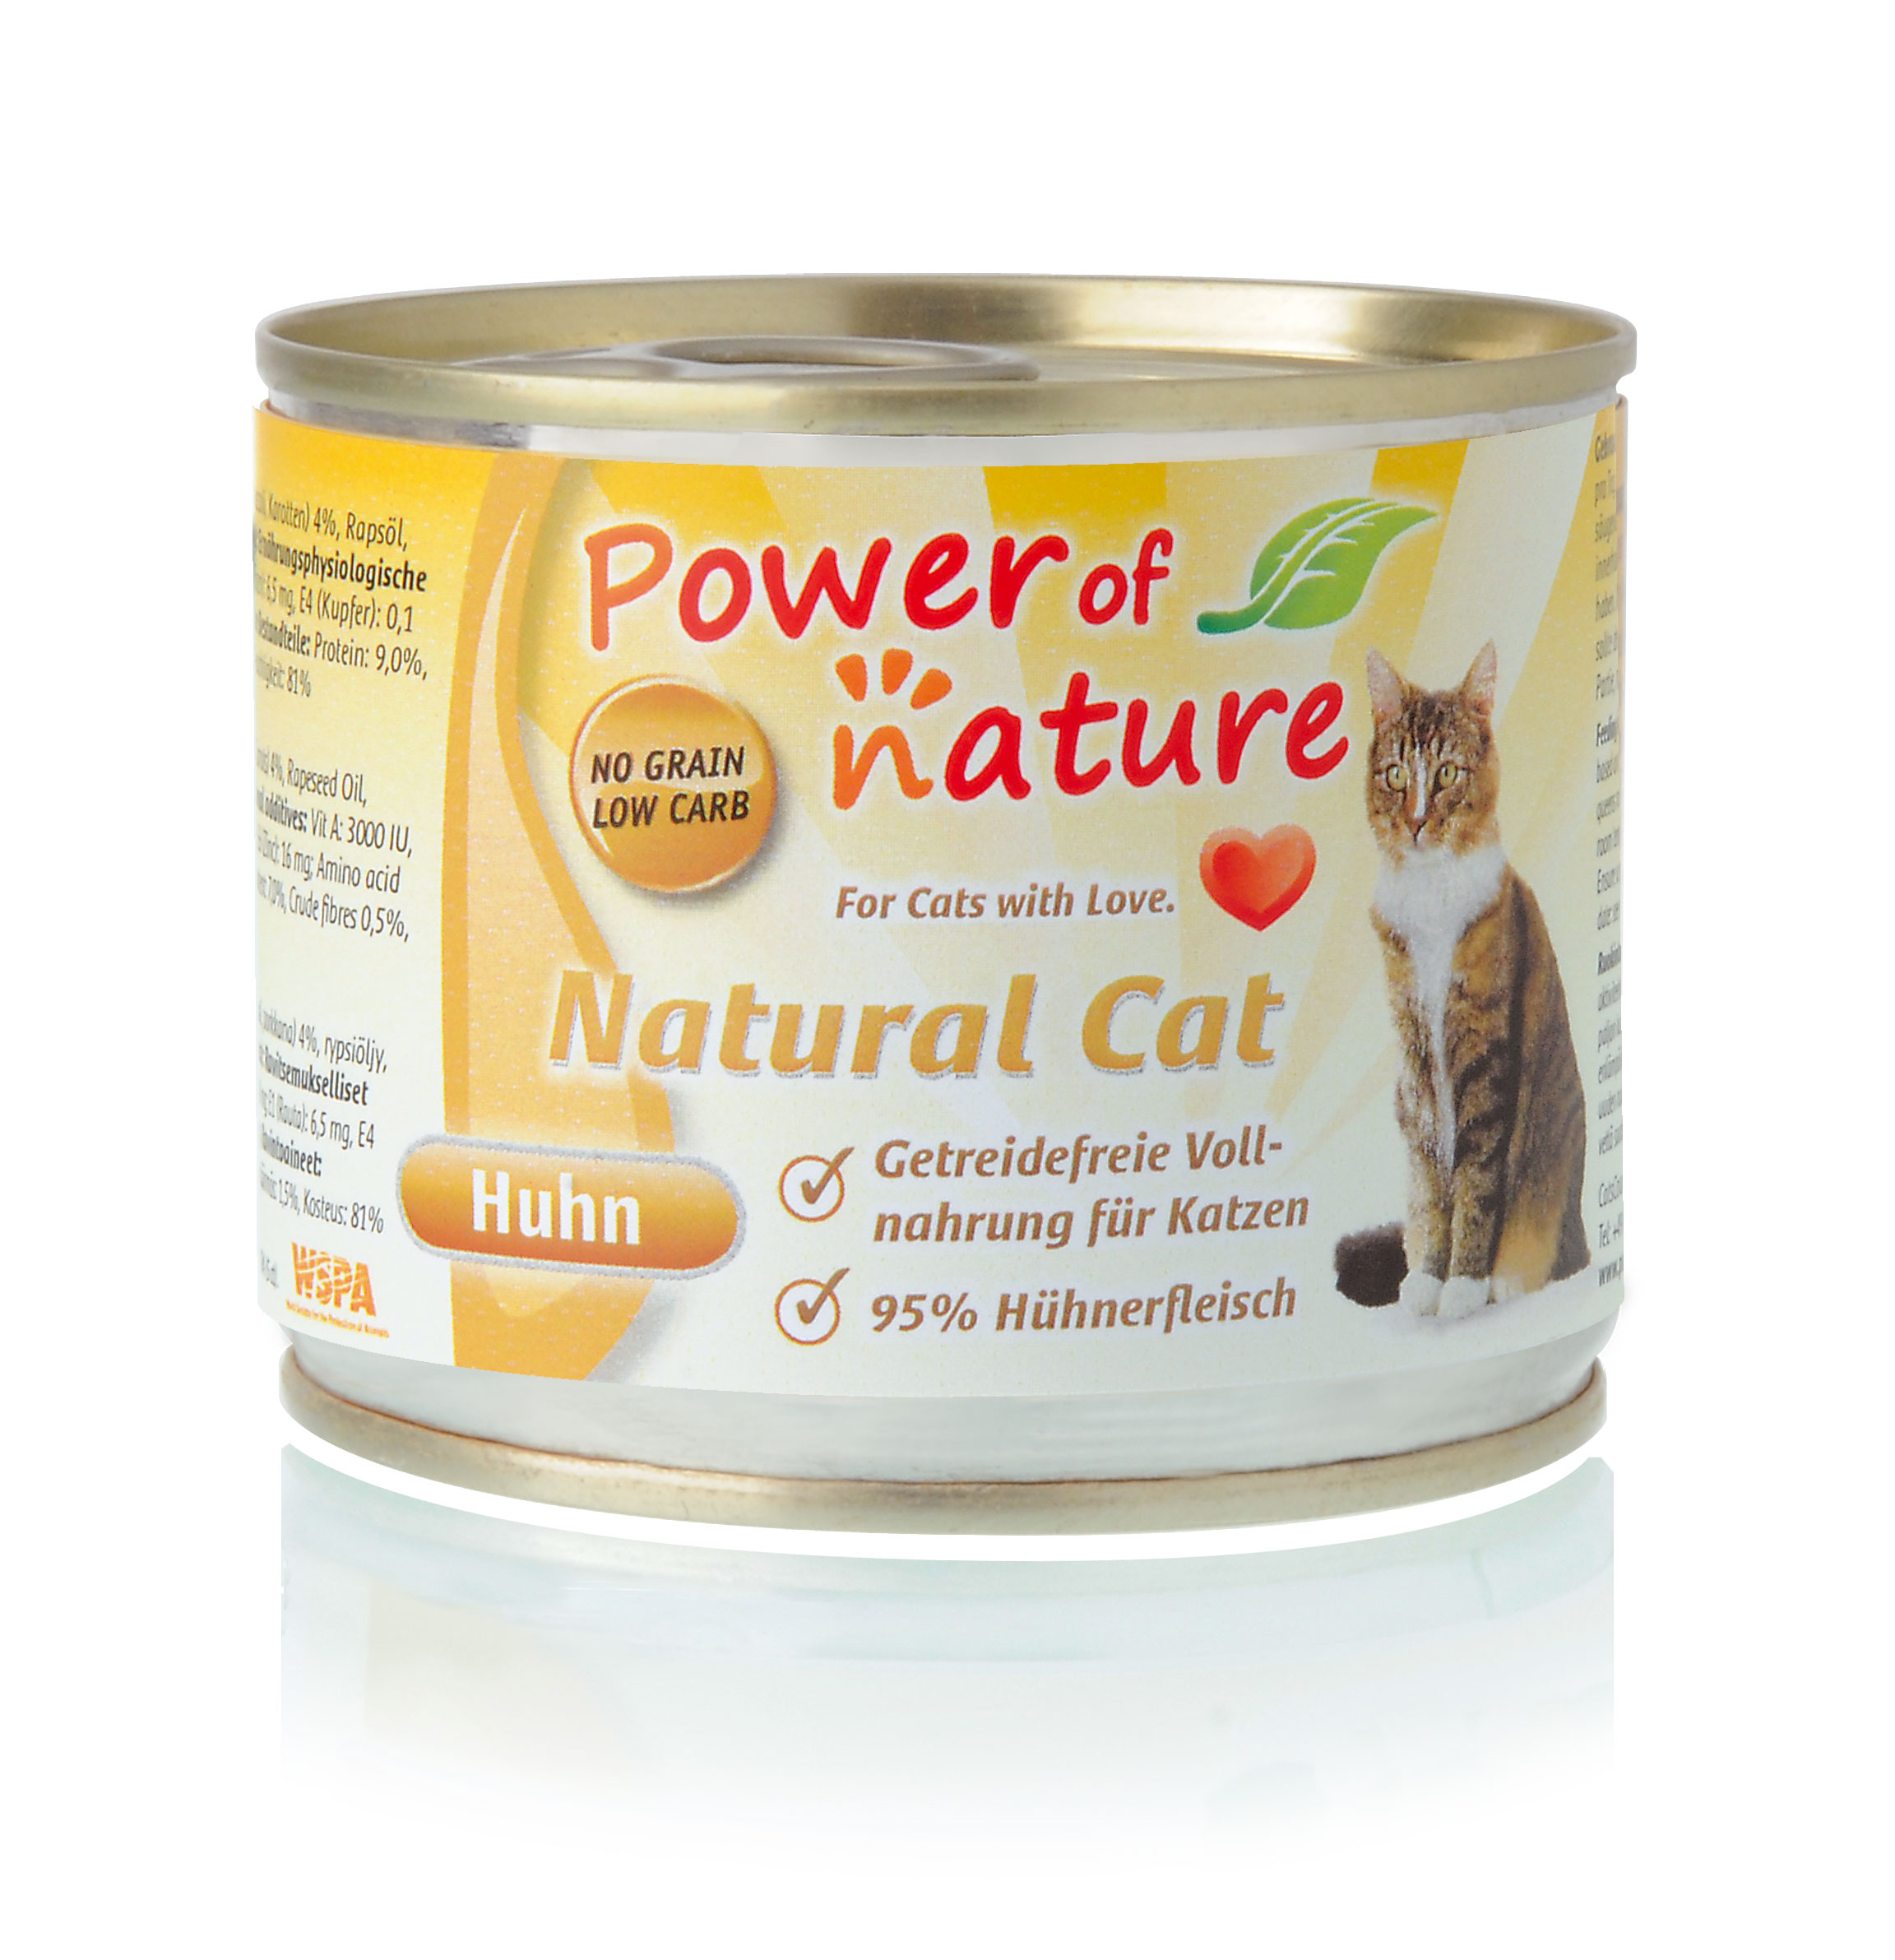 Power of Nature Natural Cat Dose Huhn 24 x 200g